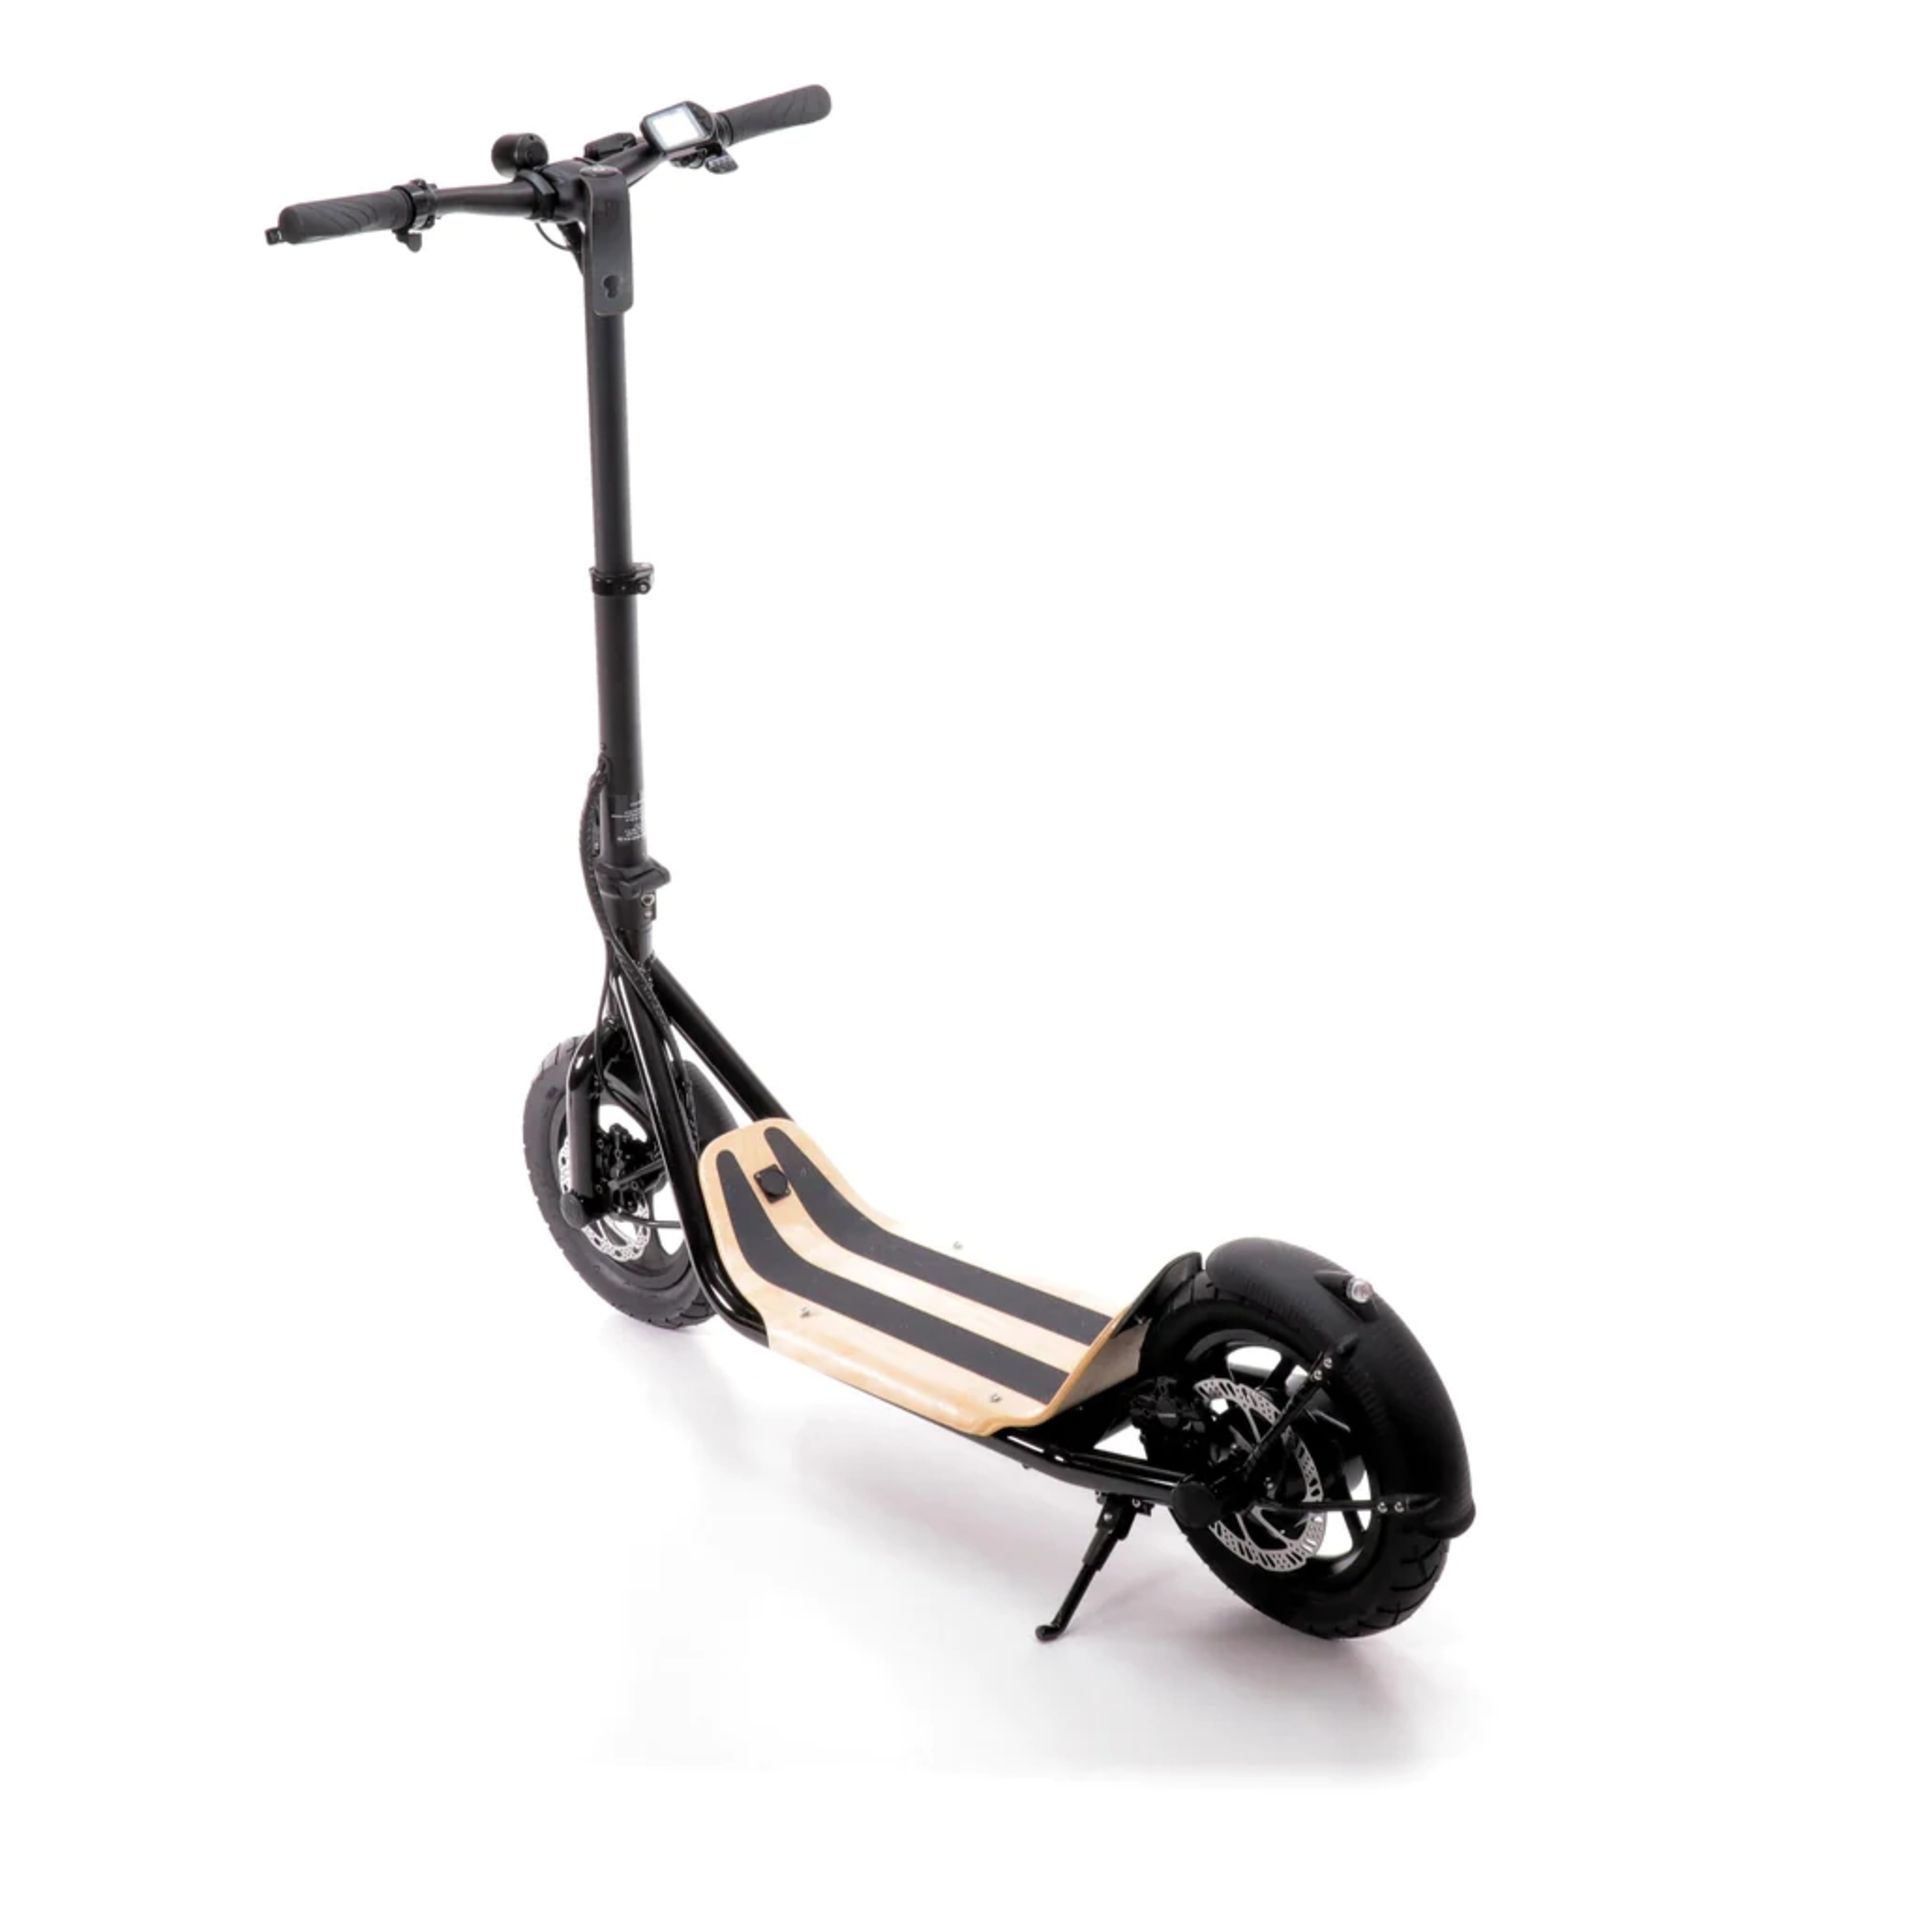 BRAND NEW 8TEV B12 PROXI ELECTRIC SCOOTER GLOSS BLACK RRP £1299, Perfect city commuter vehicle - Image 2 of 2